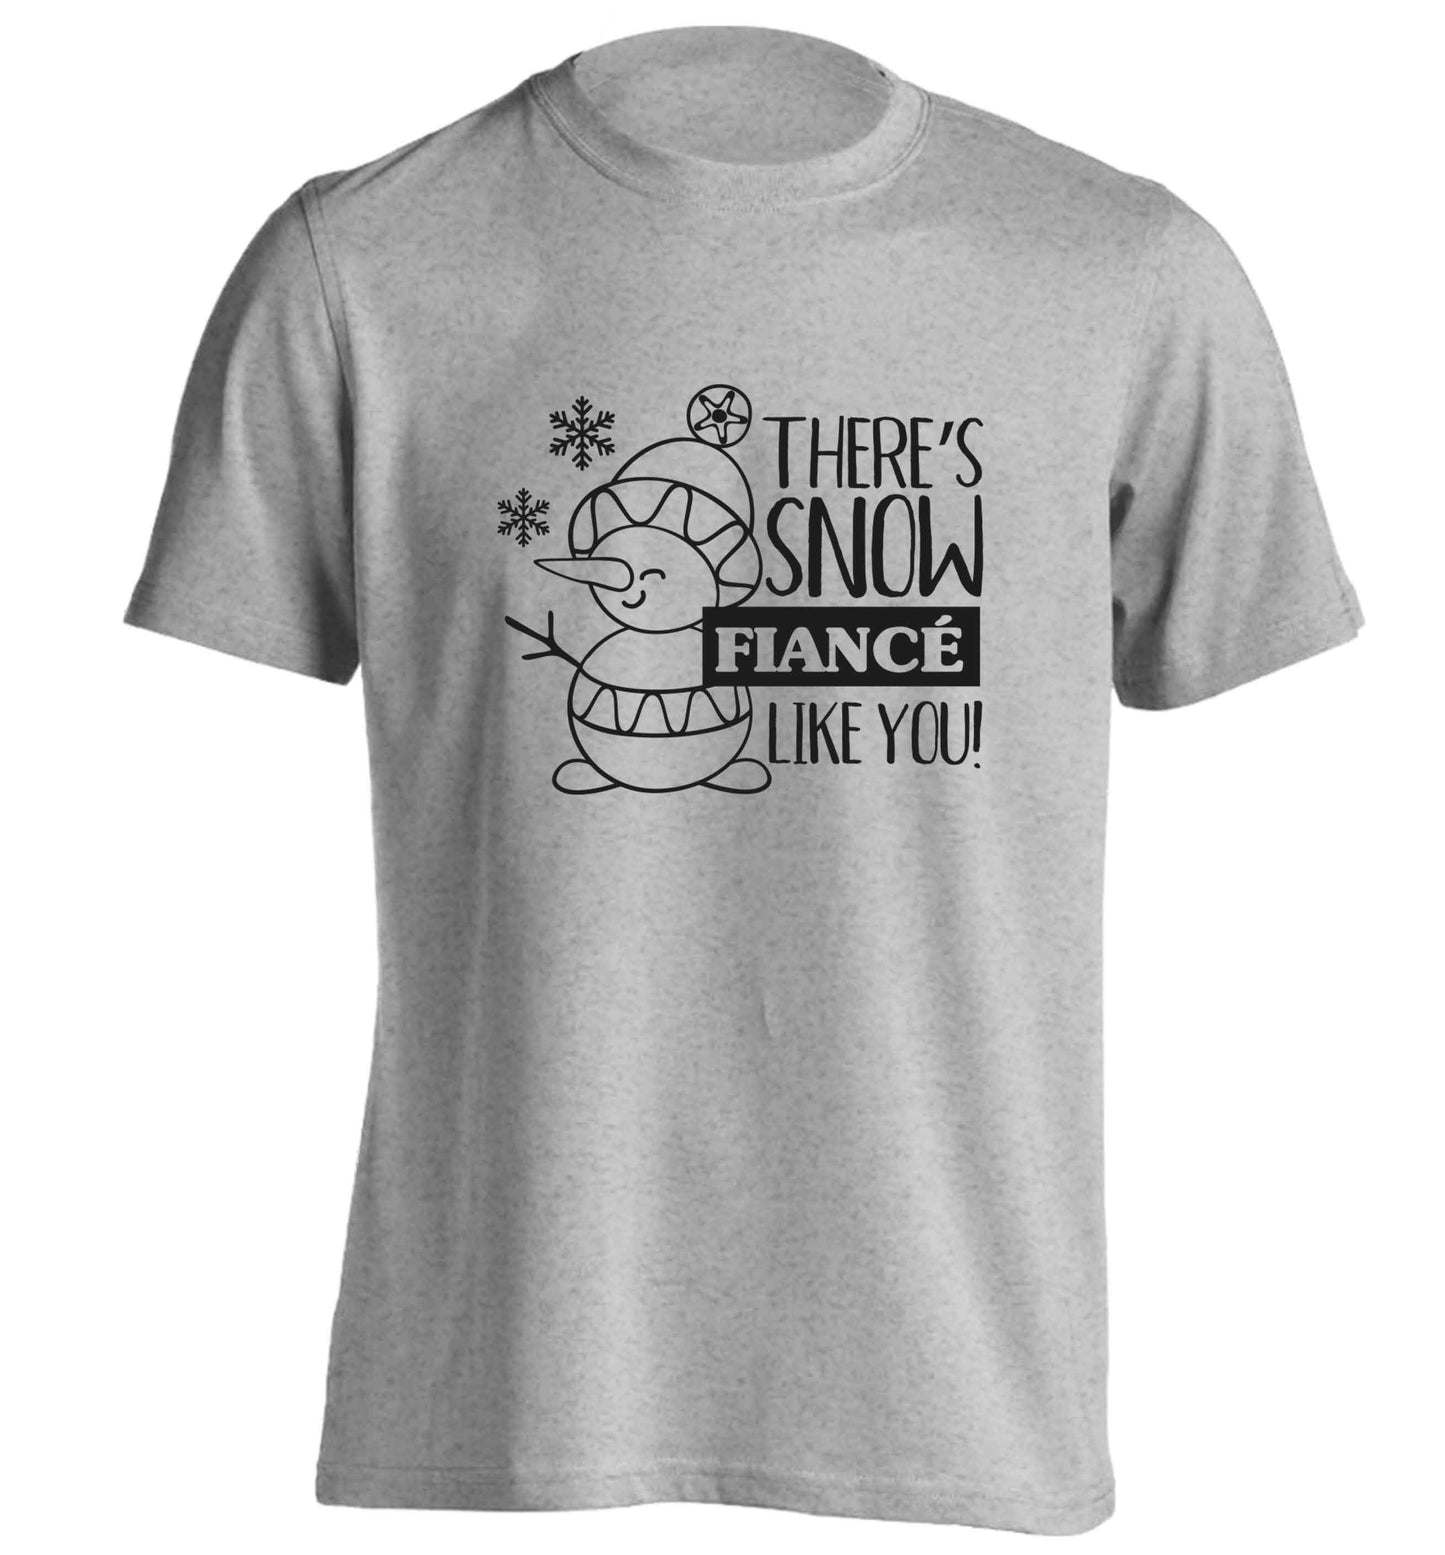 There's snow fiance like you adults unisex grey Tshirt 2XL